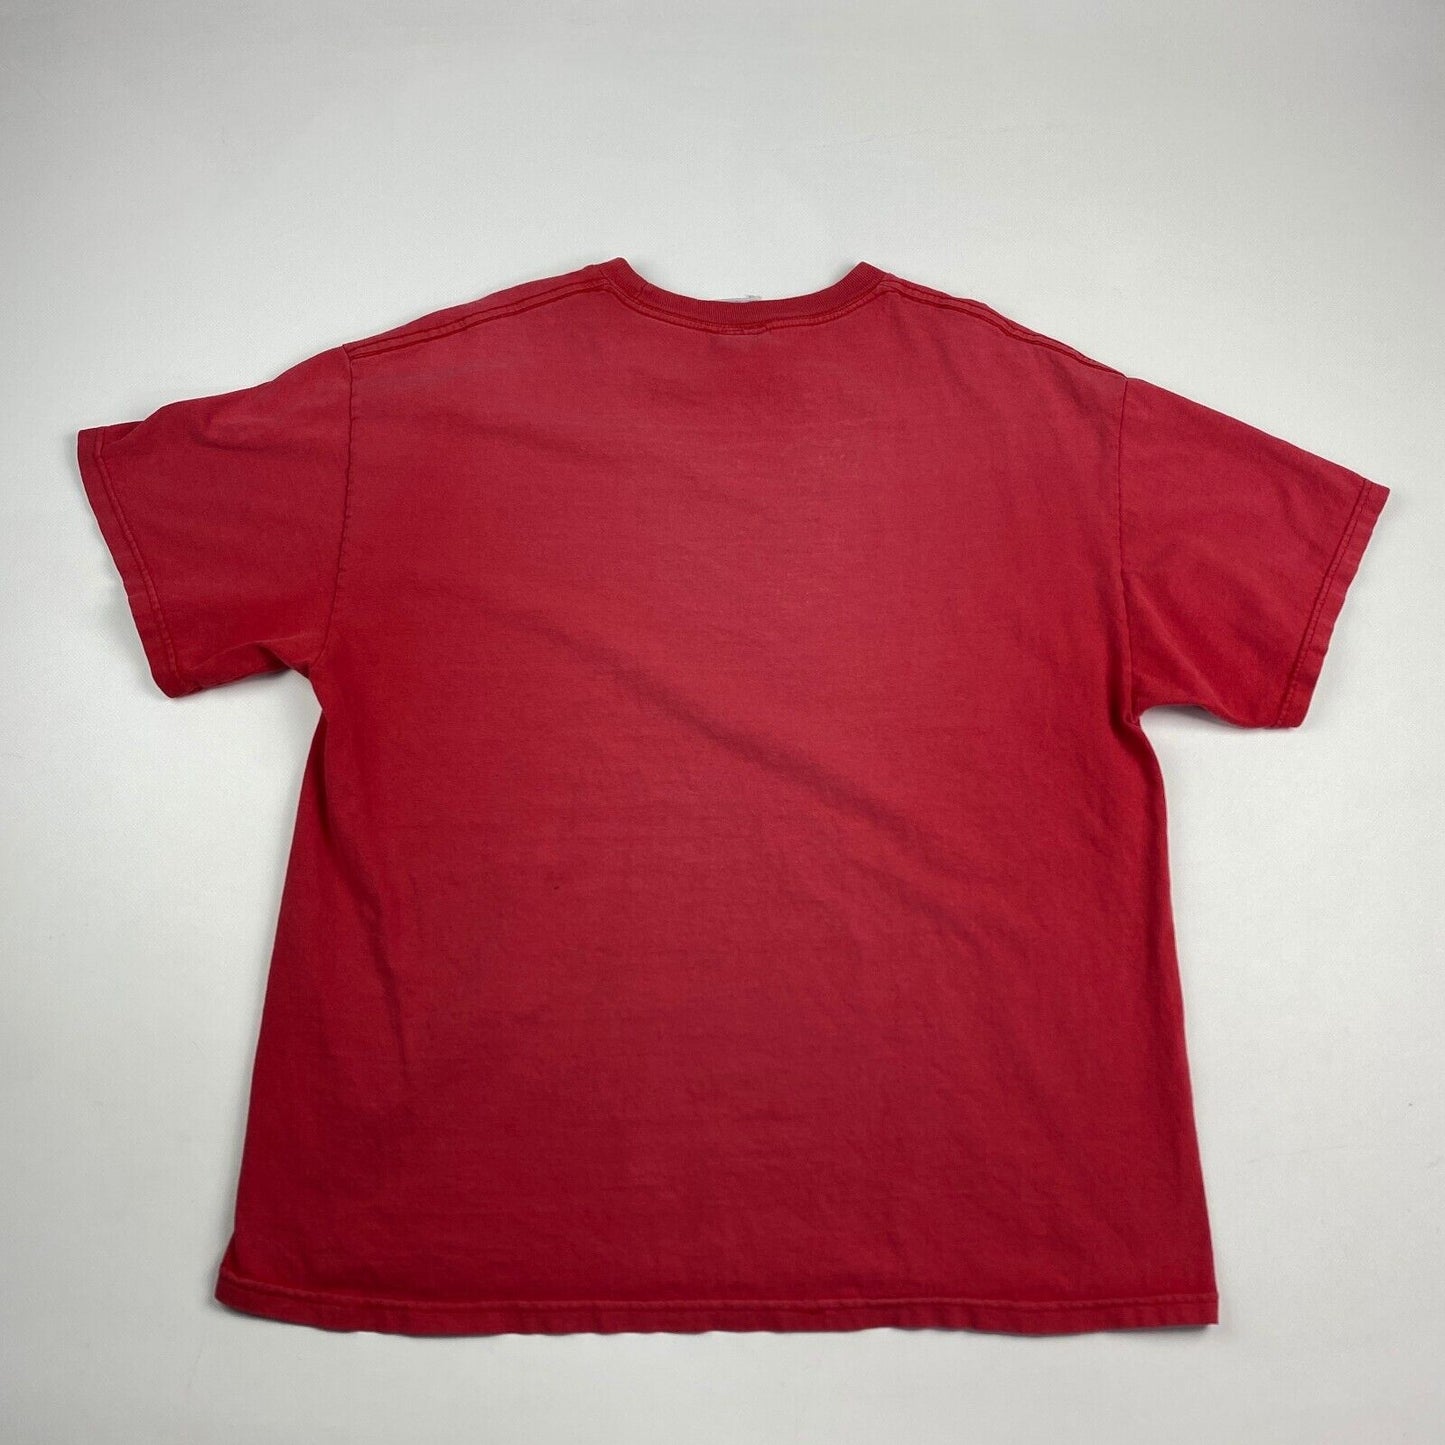 VINTAGE I Only Please One Person A Day Faded Red T-Shirt sz XL Mens